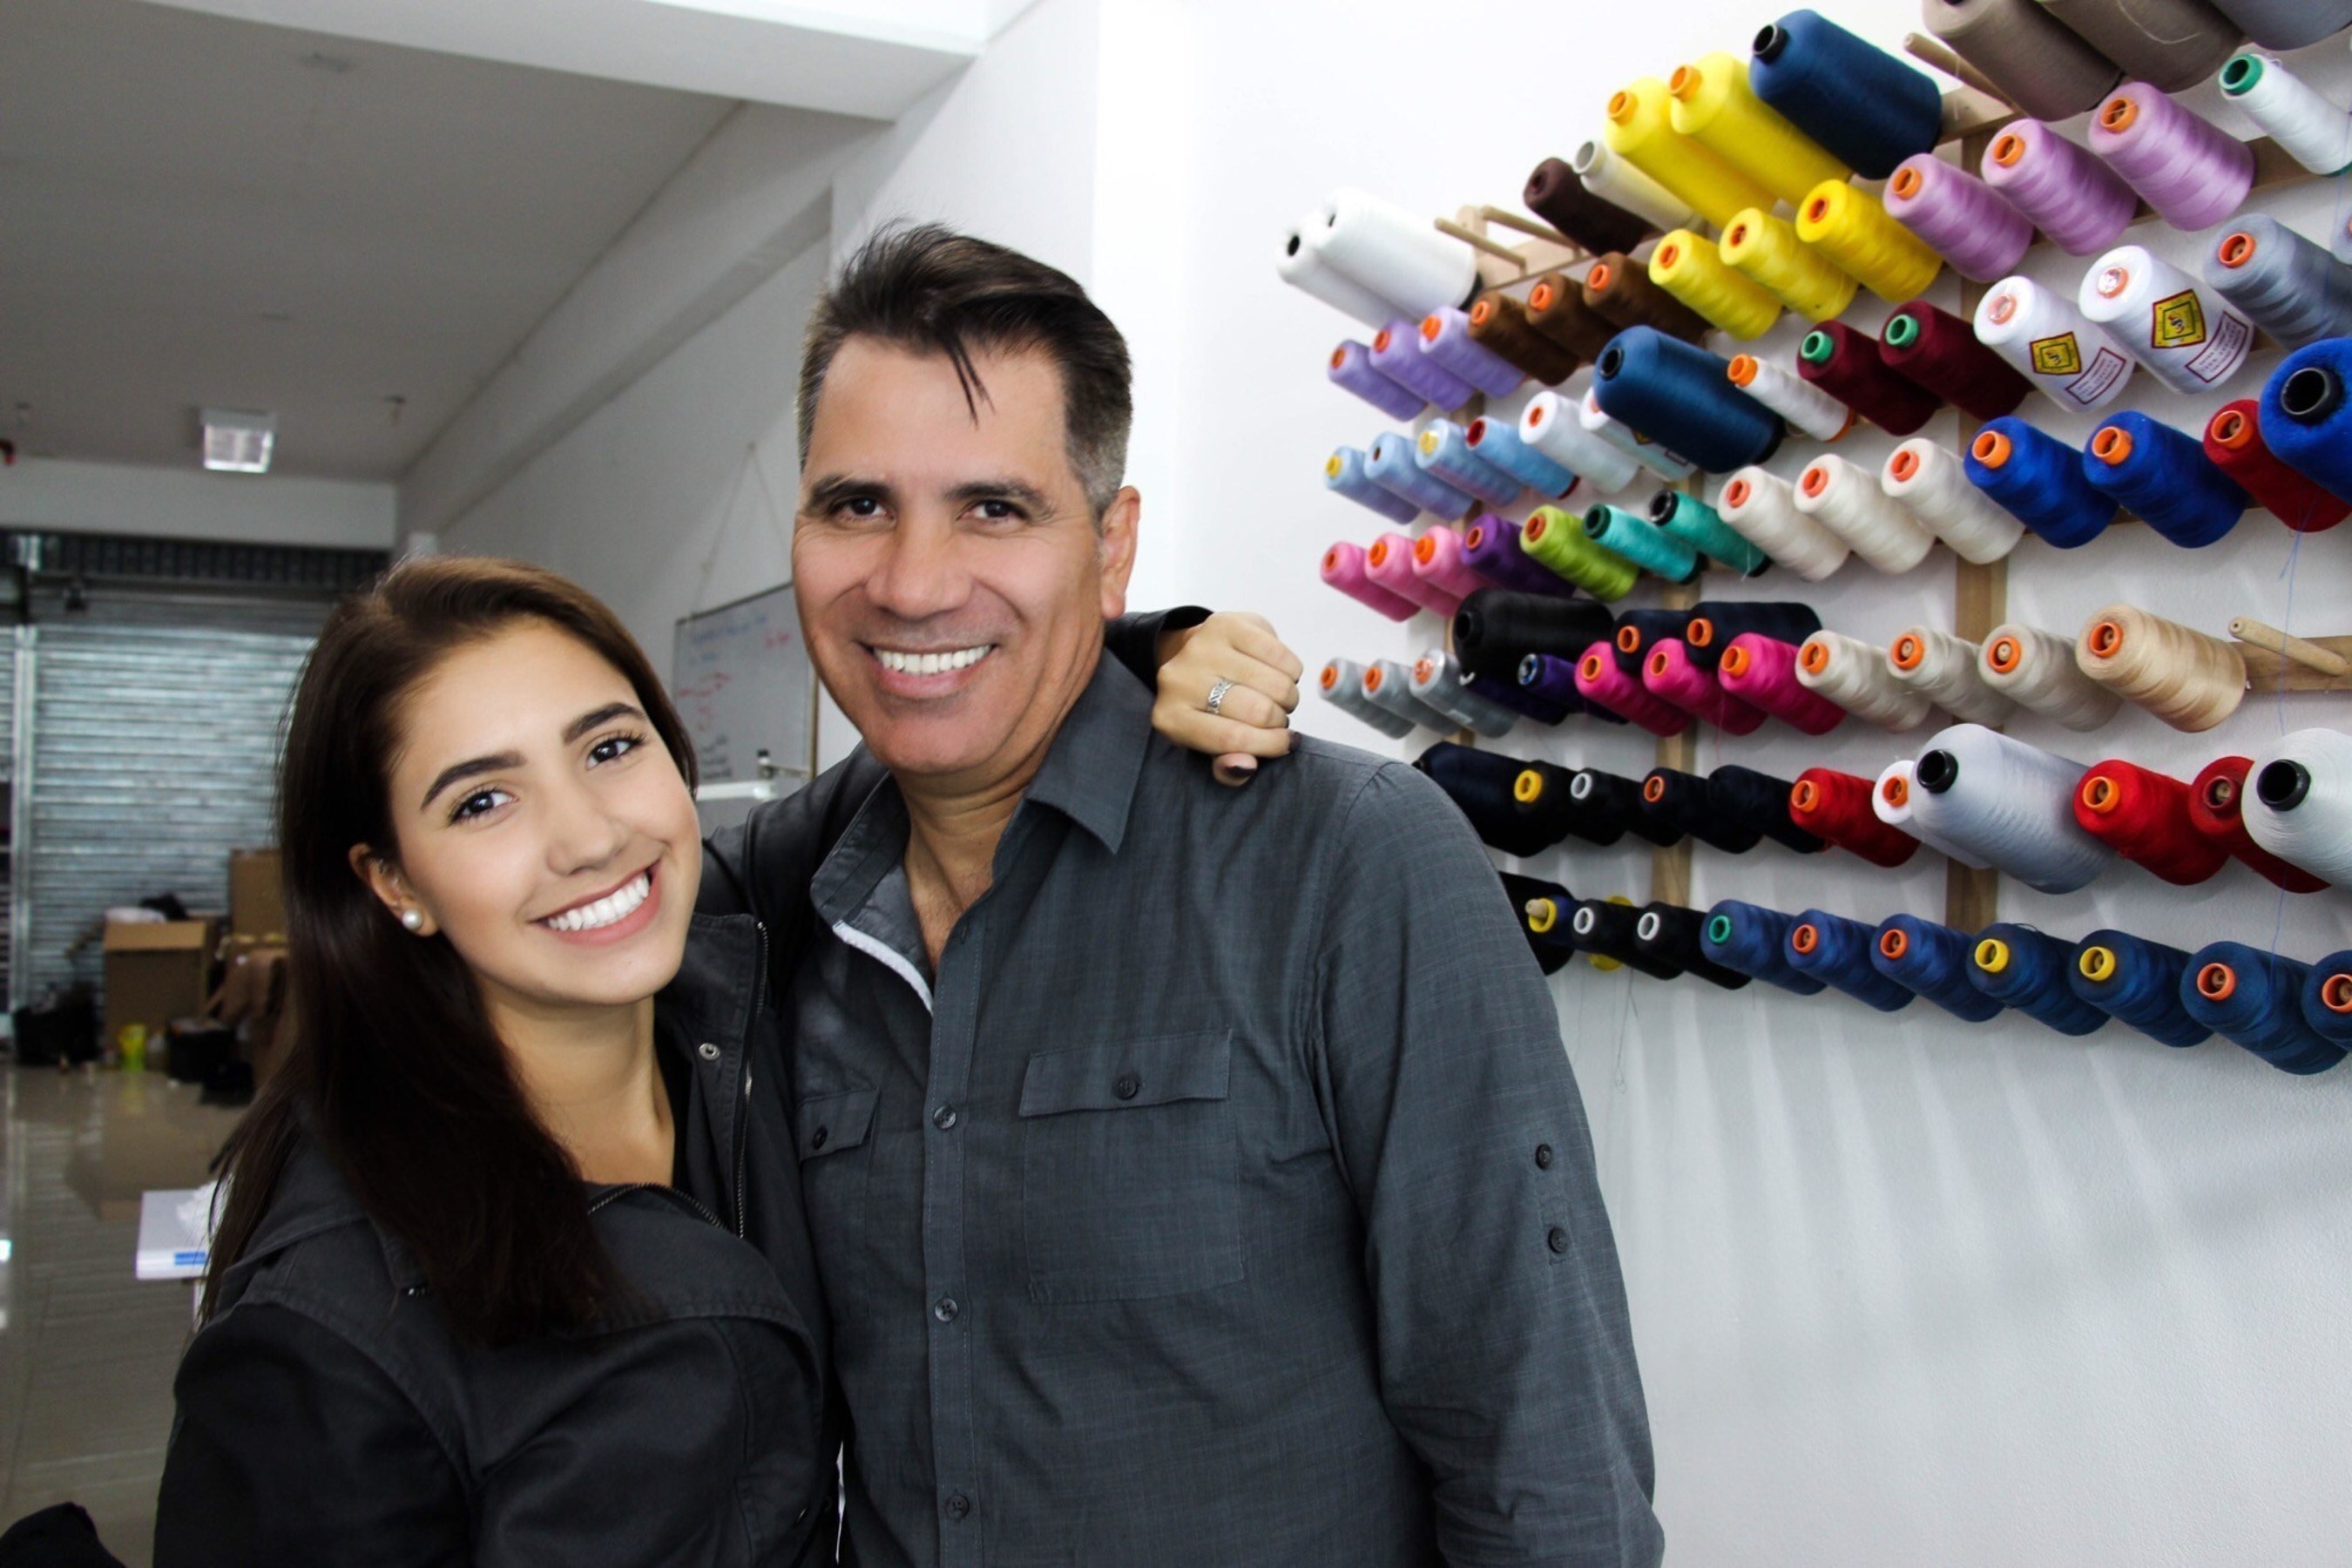 Belen Rivera and Alan Rivera, daughter and father, the TriOwl founders who want to innovate the industry with a new concept of business who will donate up to 50% of its net profits